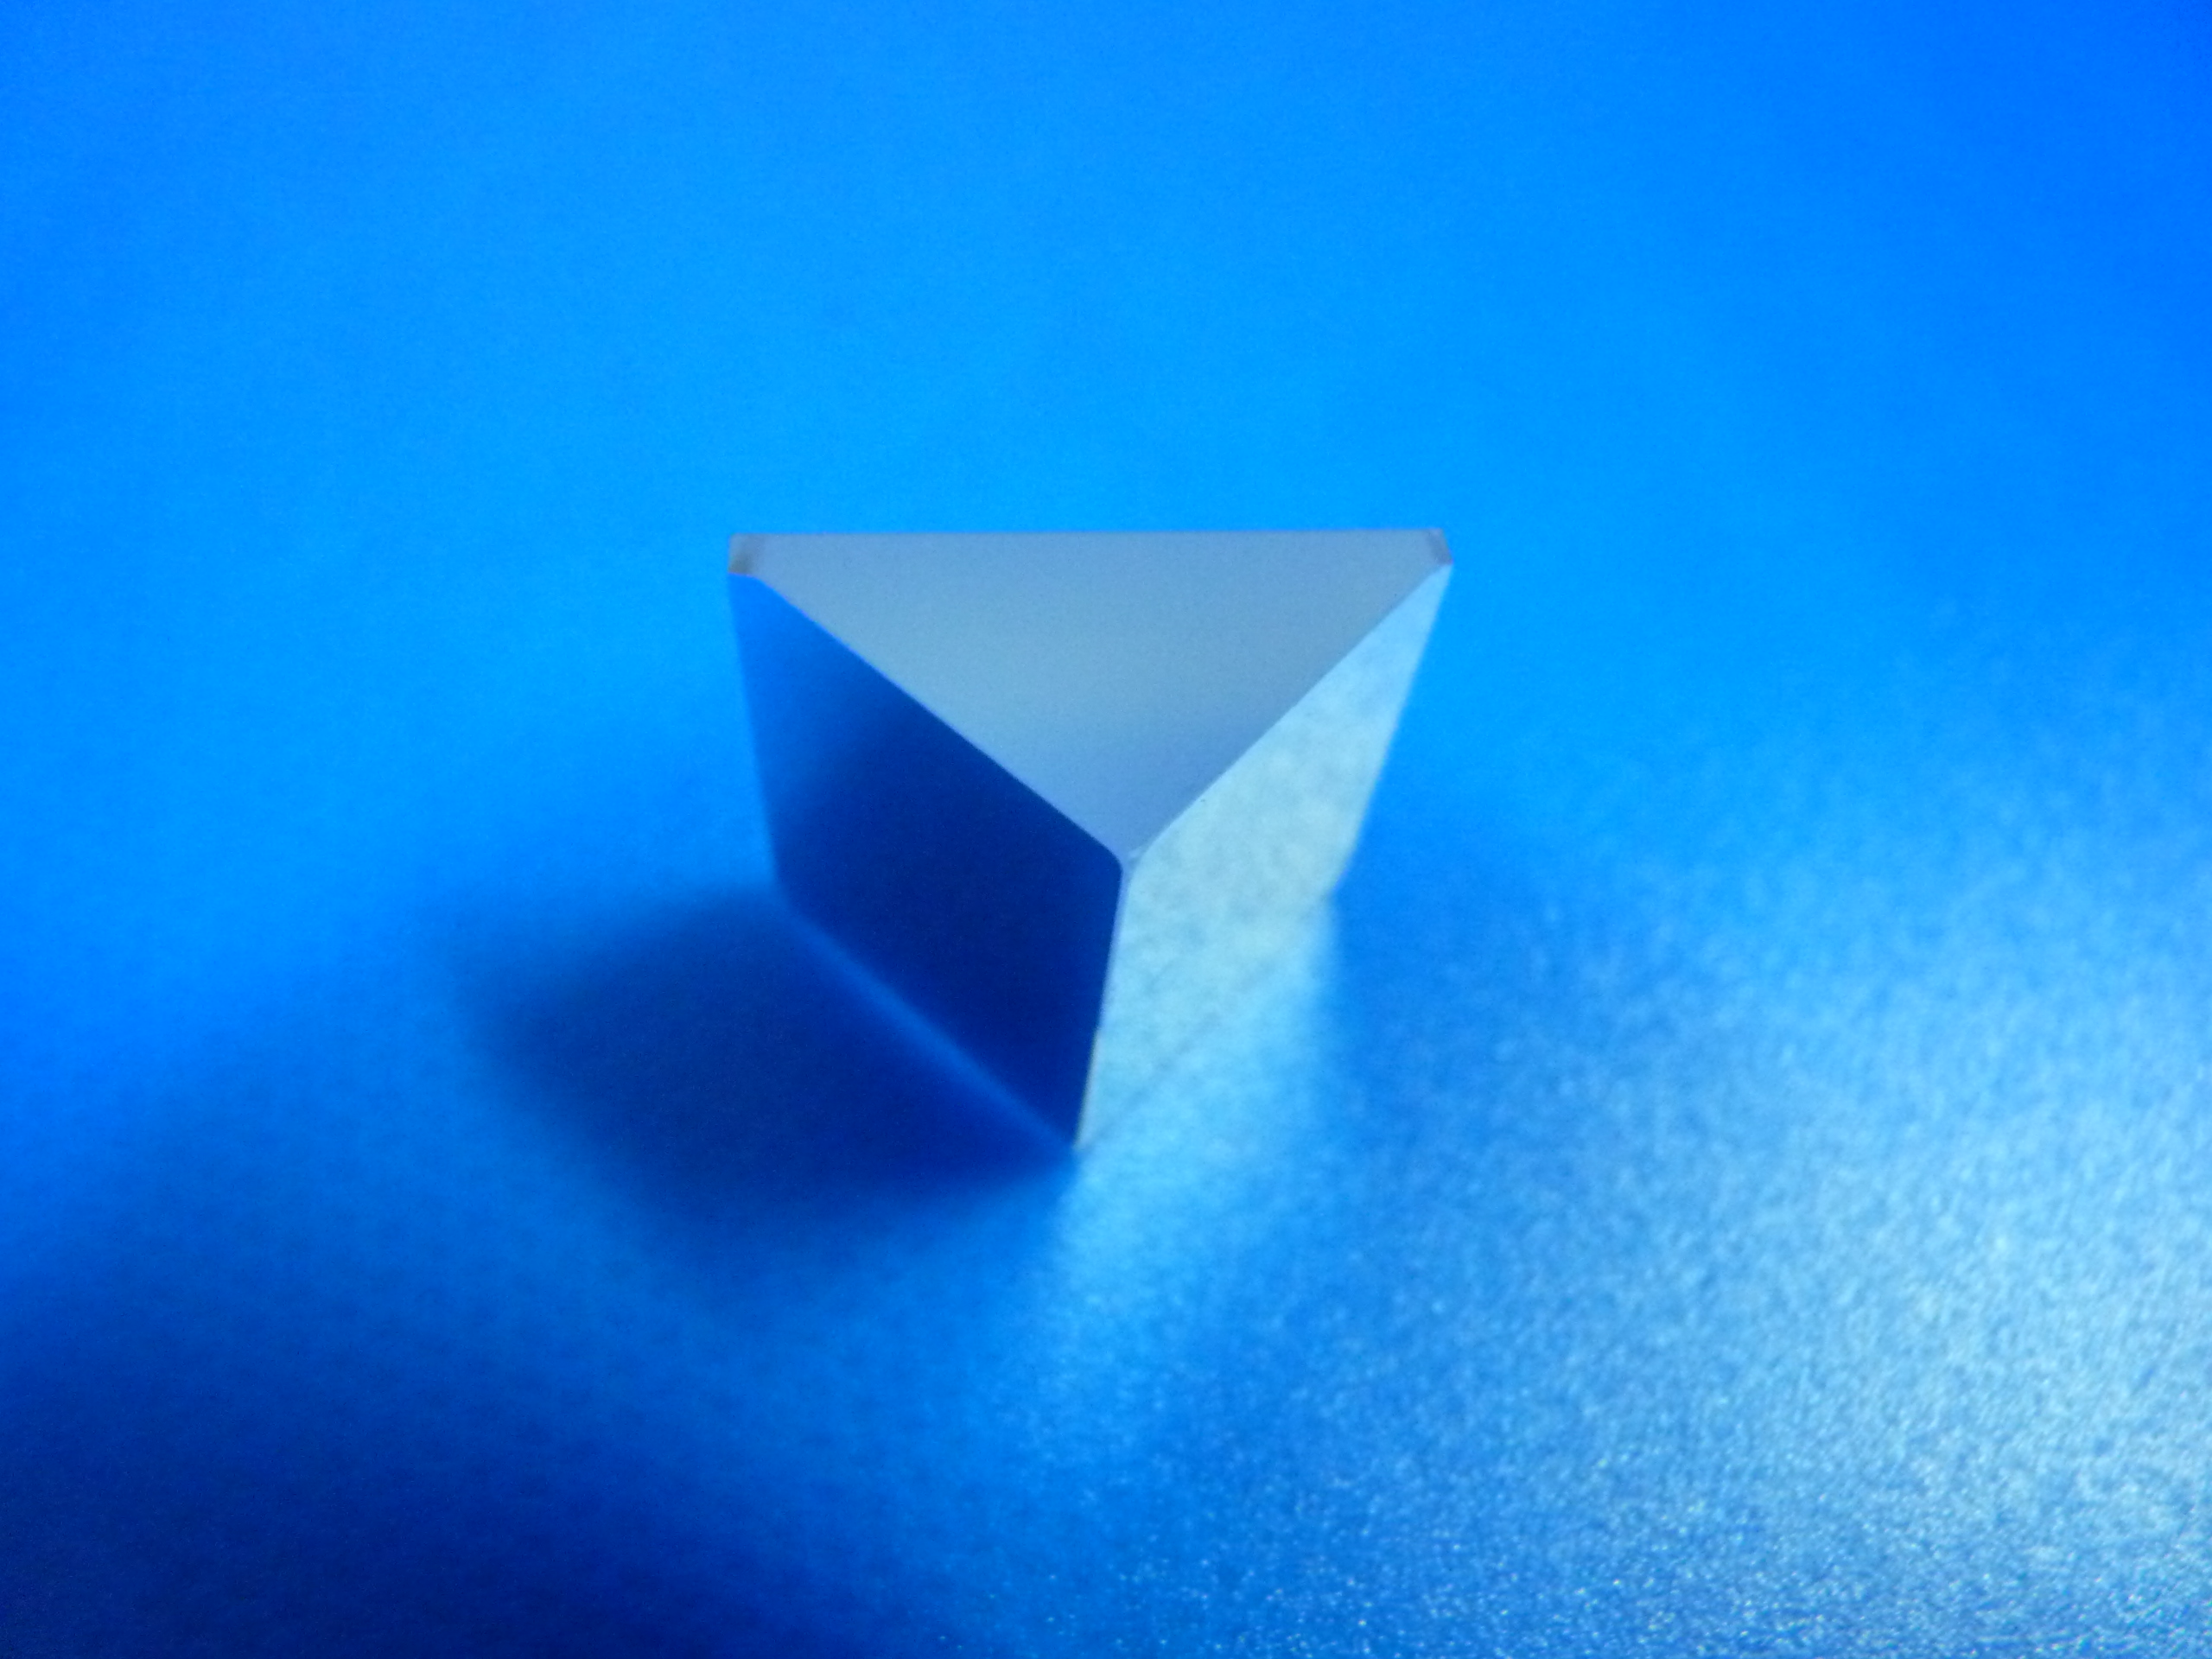 Equilateral prism